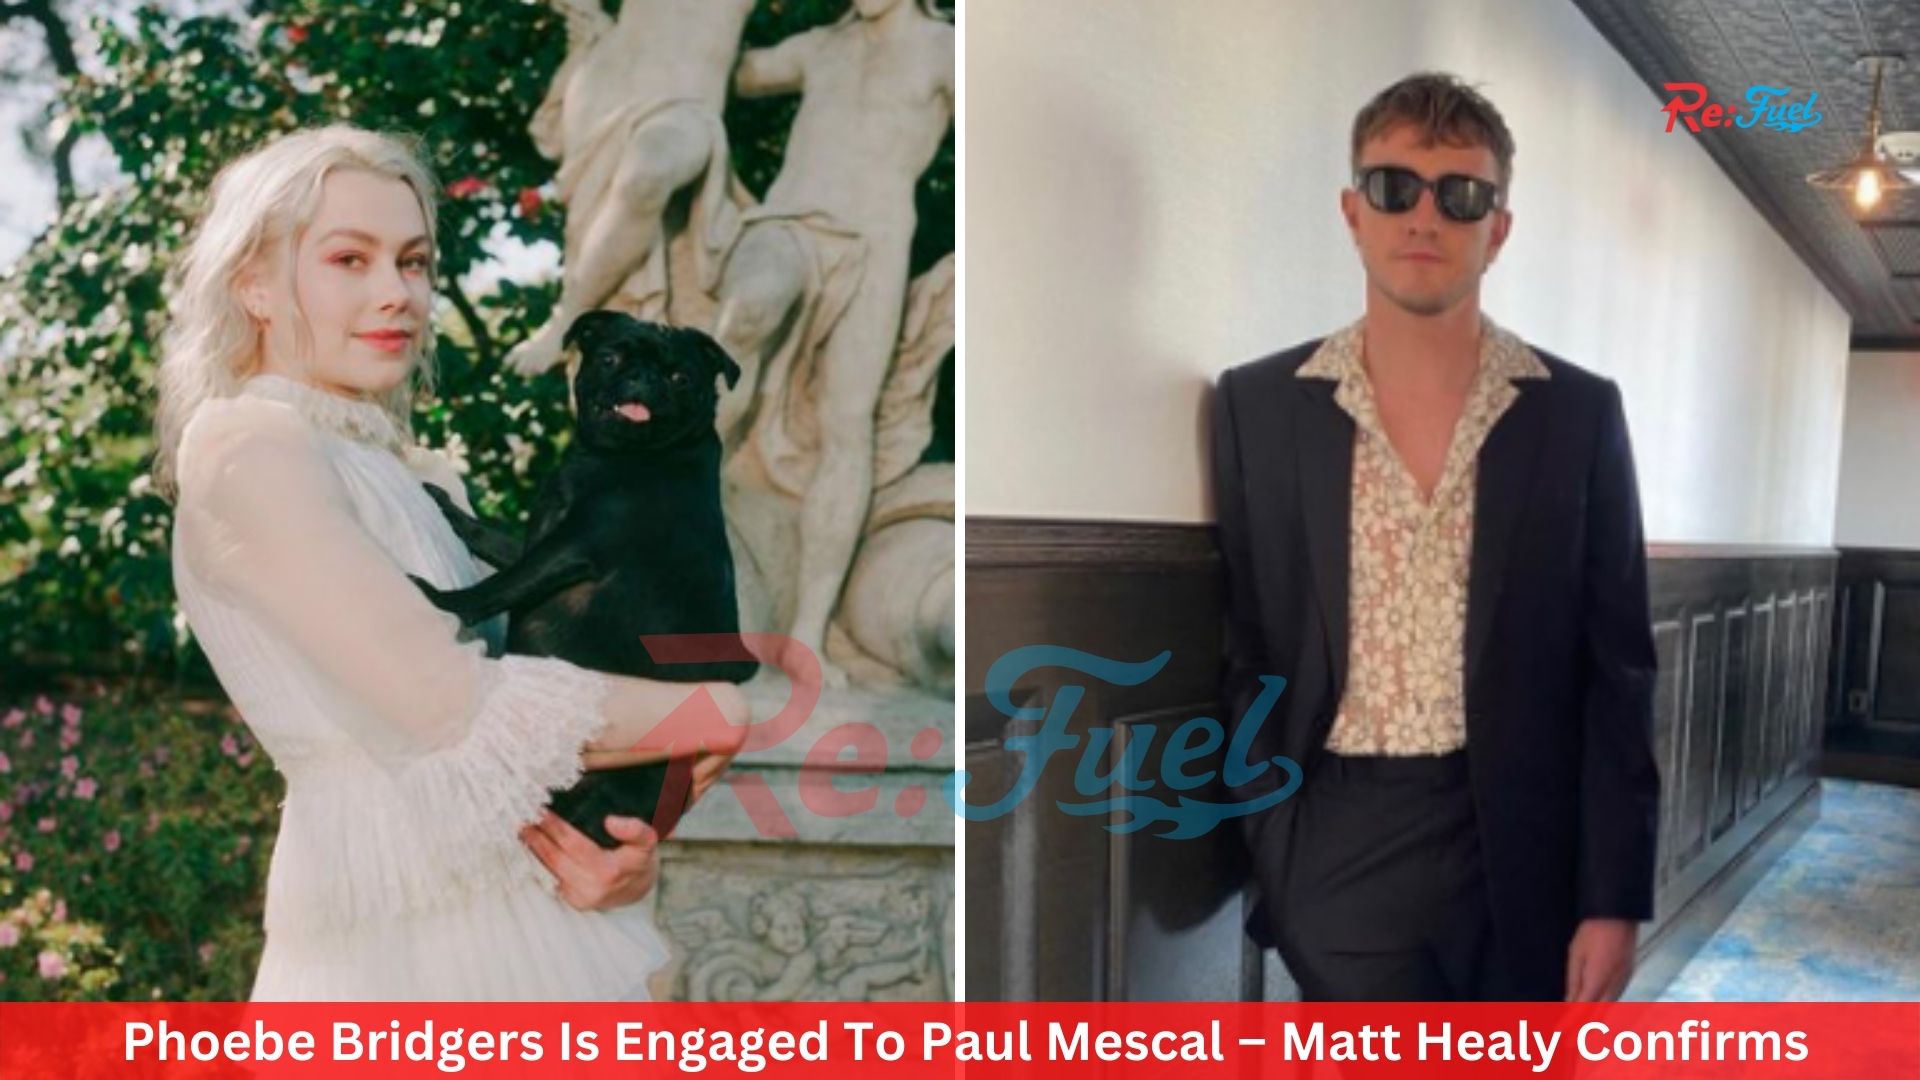 Phoebe Bridgers Is Engaged To Paul Mescal – Matt Healy Confirms